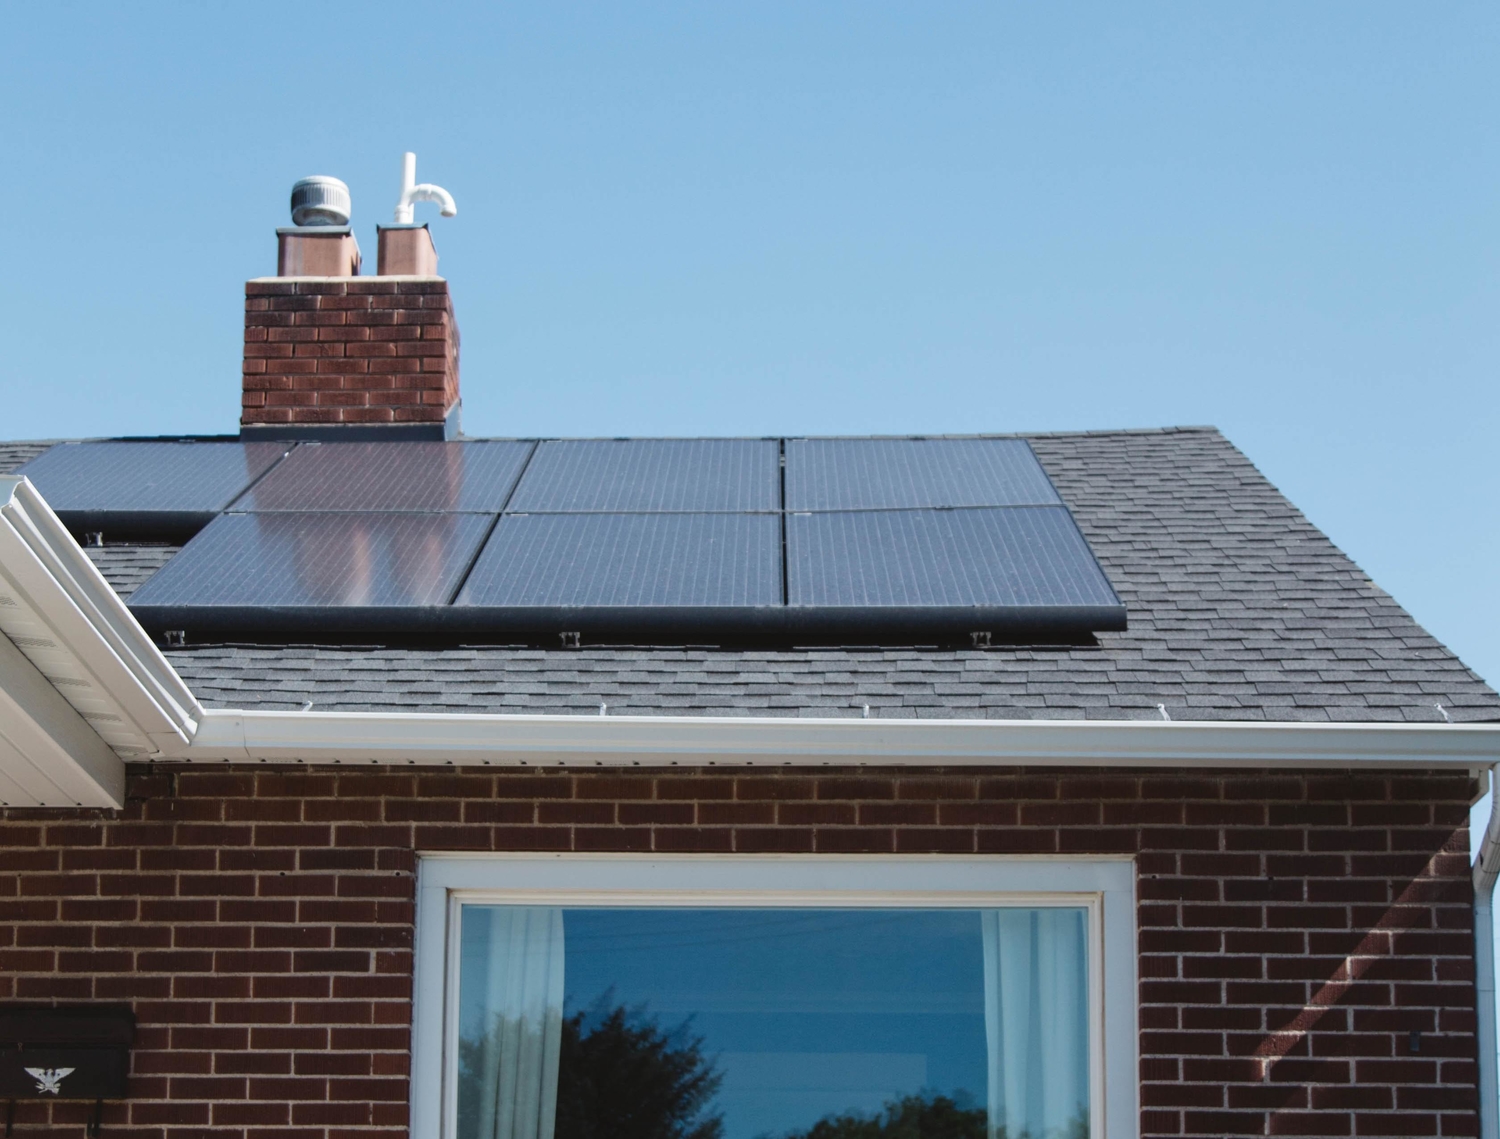 What you need to know about converting your home to solar